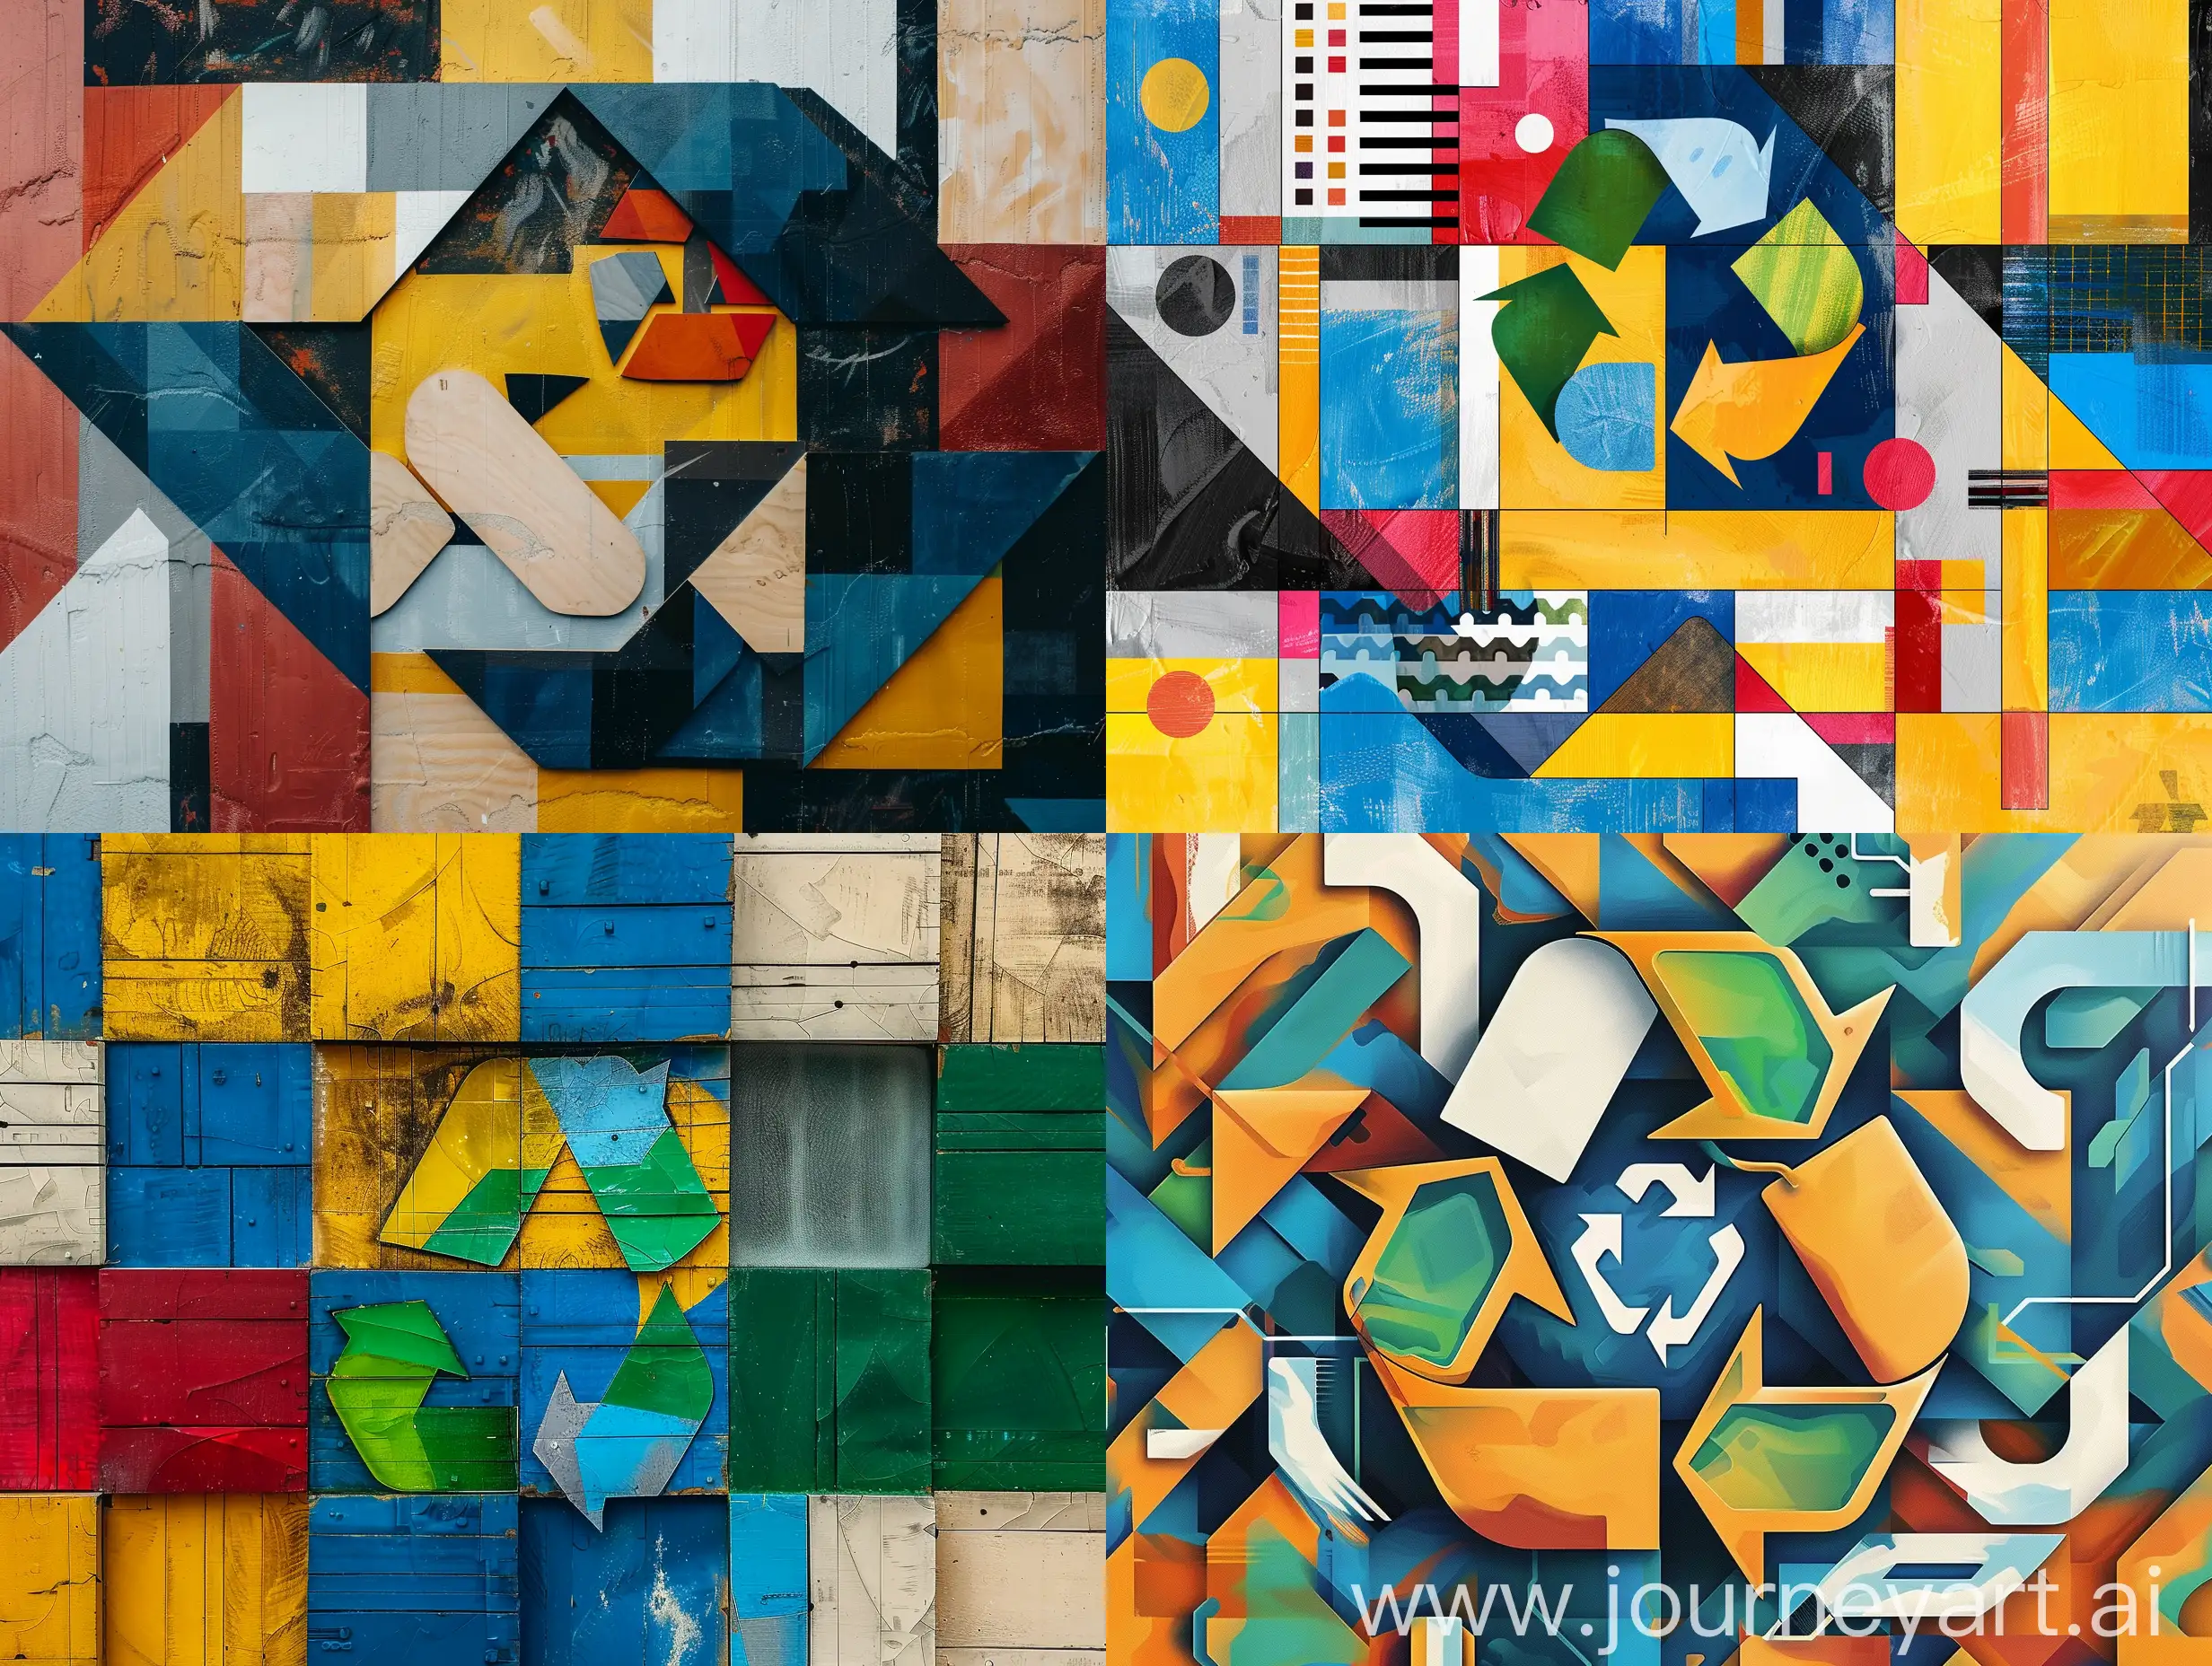 Abstract-Cubist-Artwork-Featuring-Sustainable-Symbolism